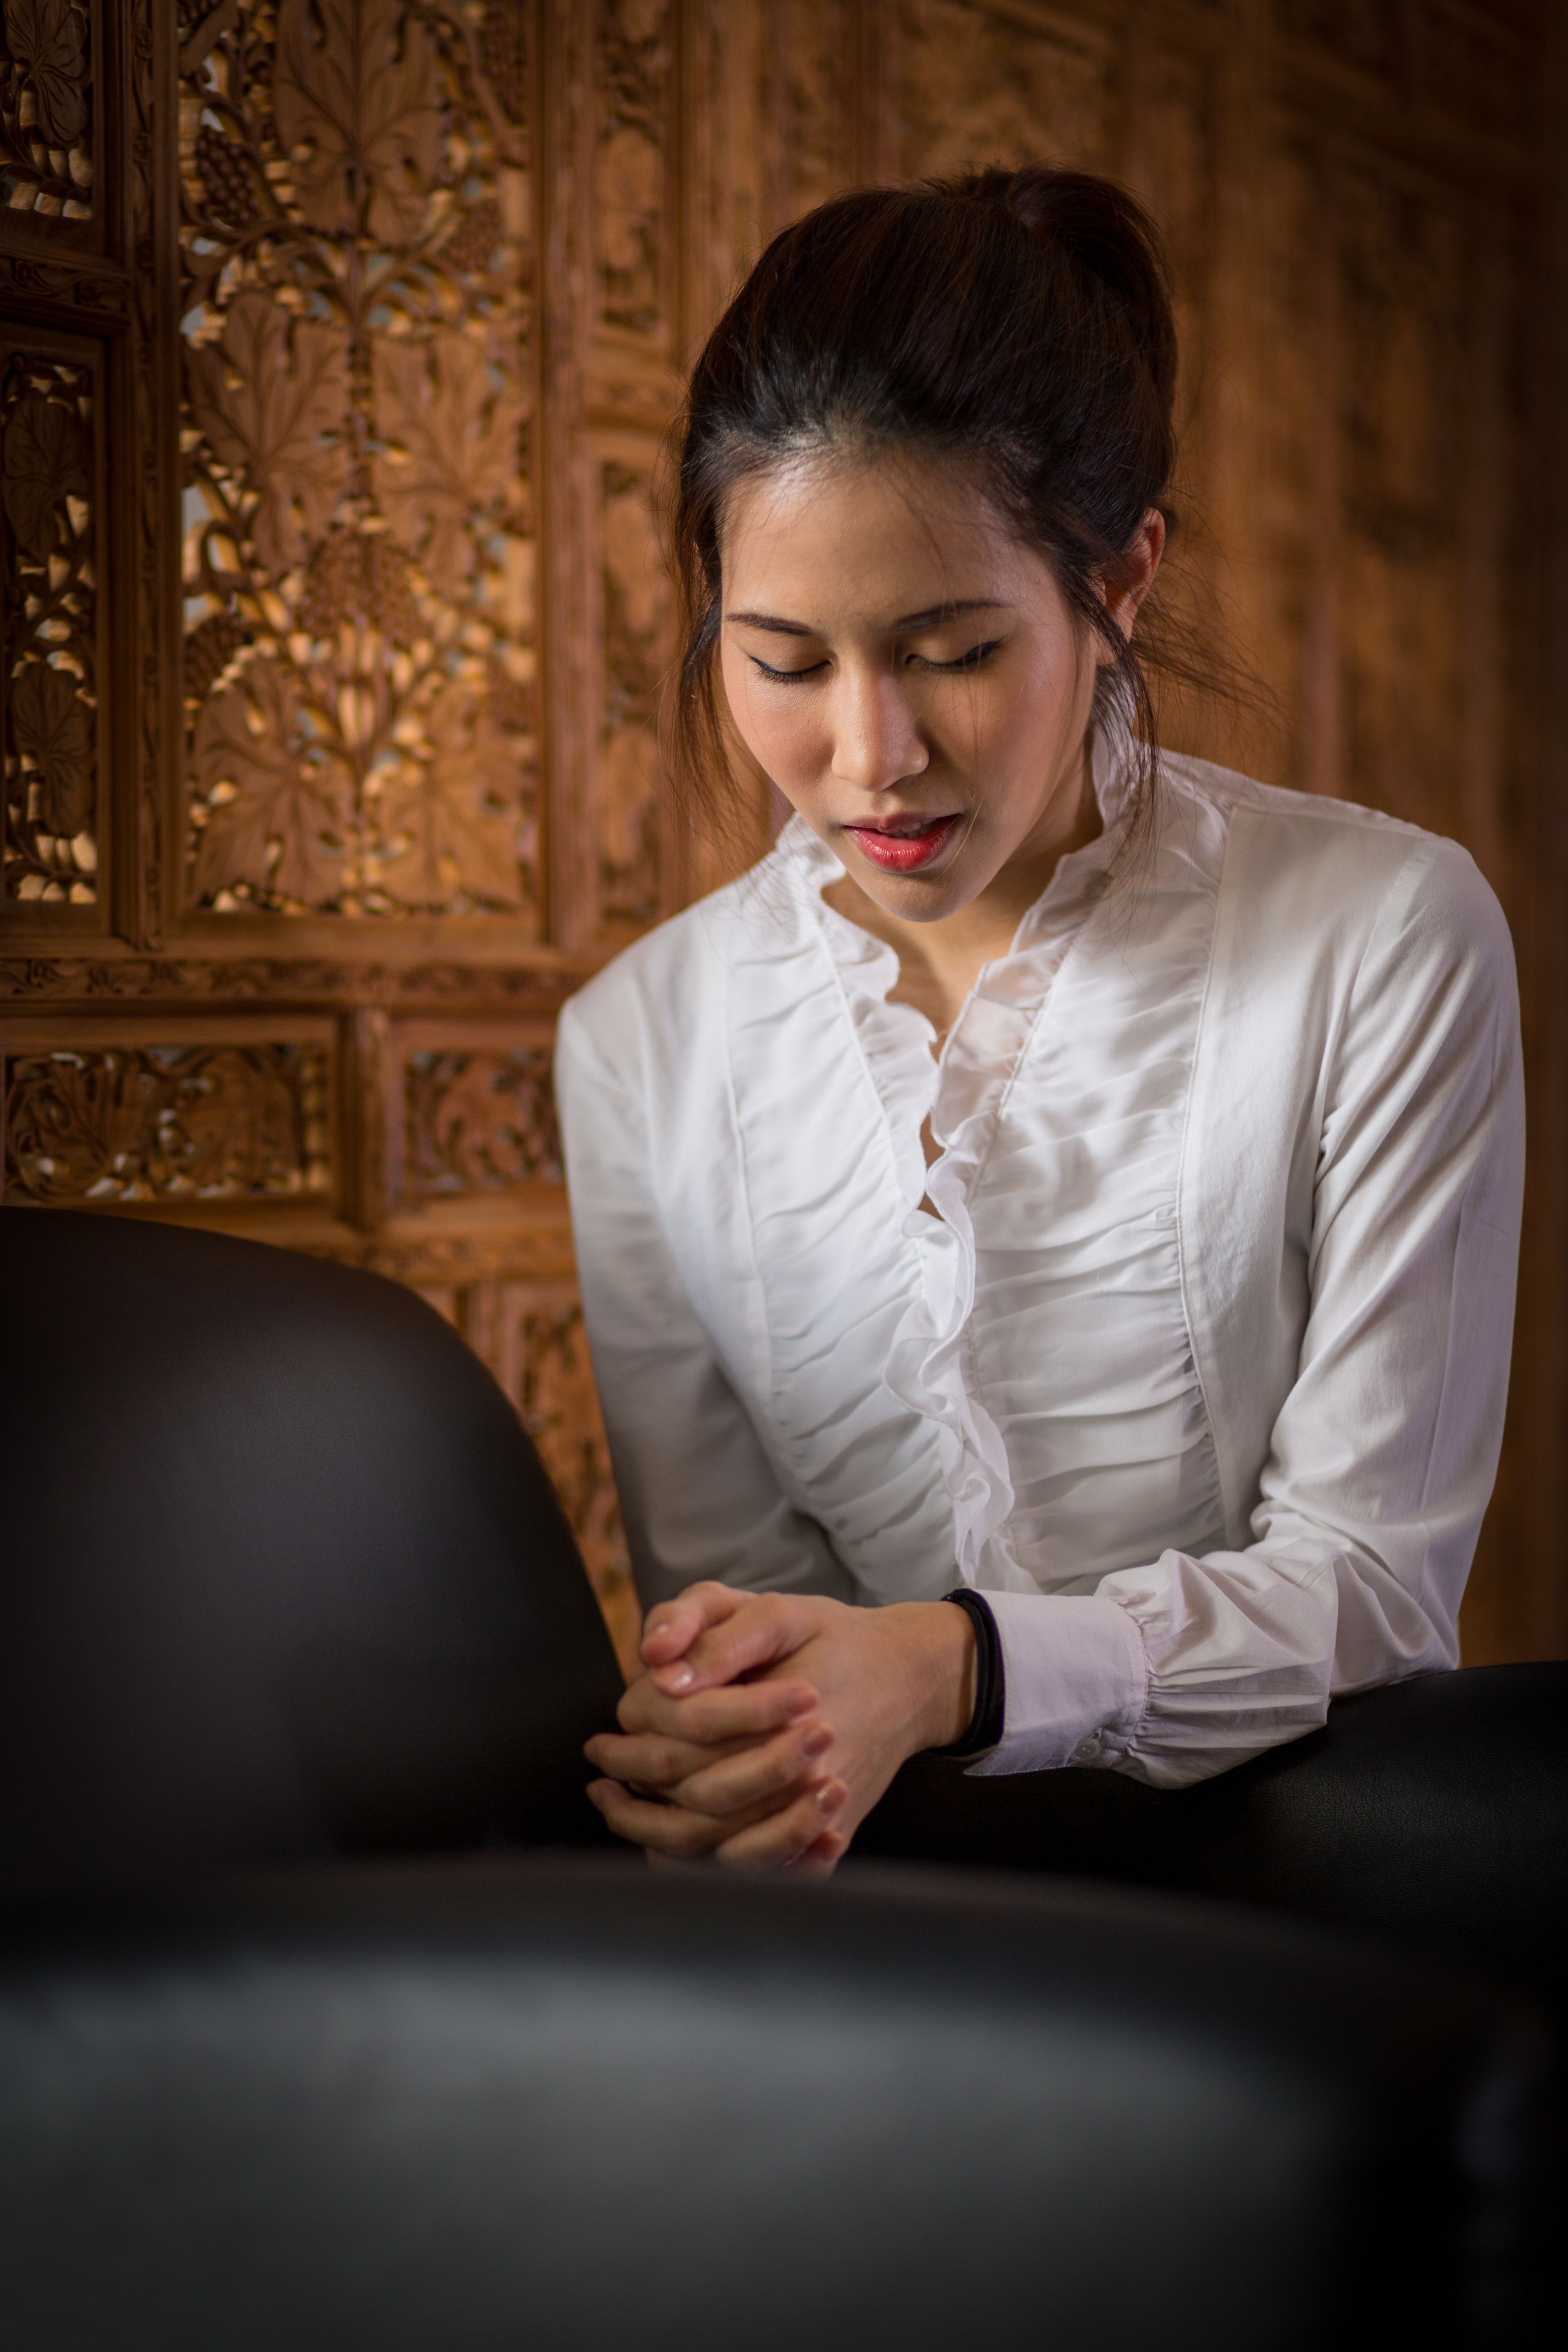 A young woman in Thailand kneels by a chair and prays.